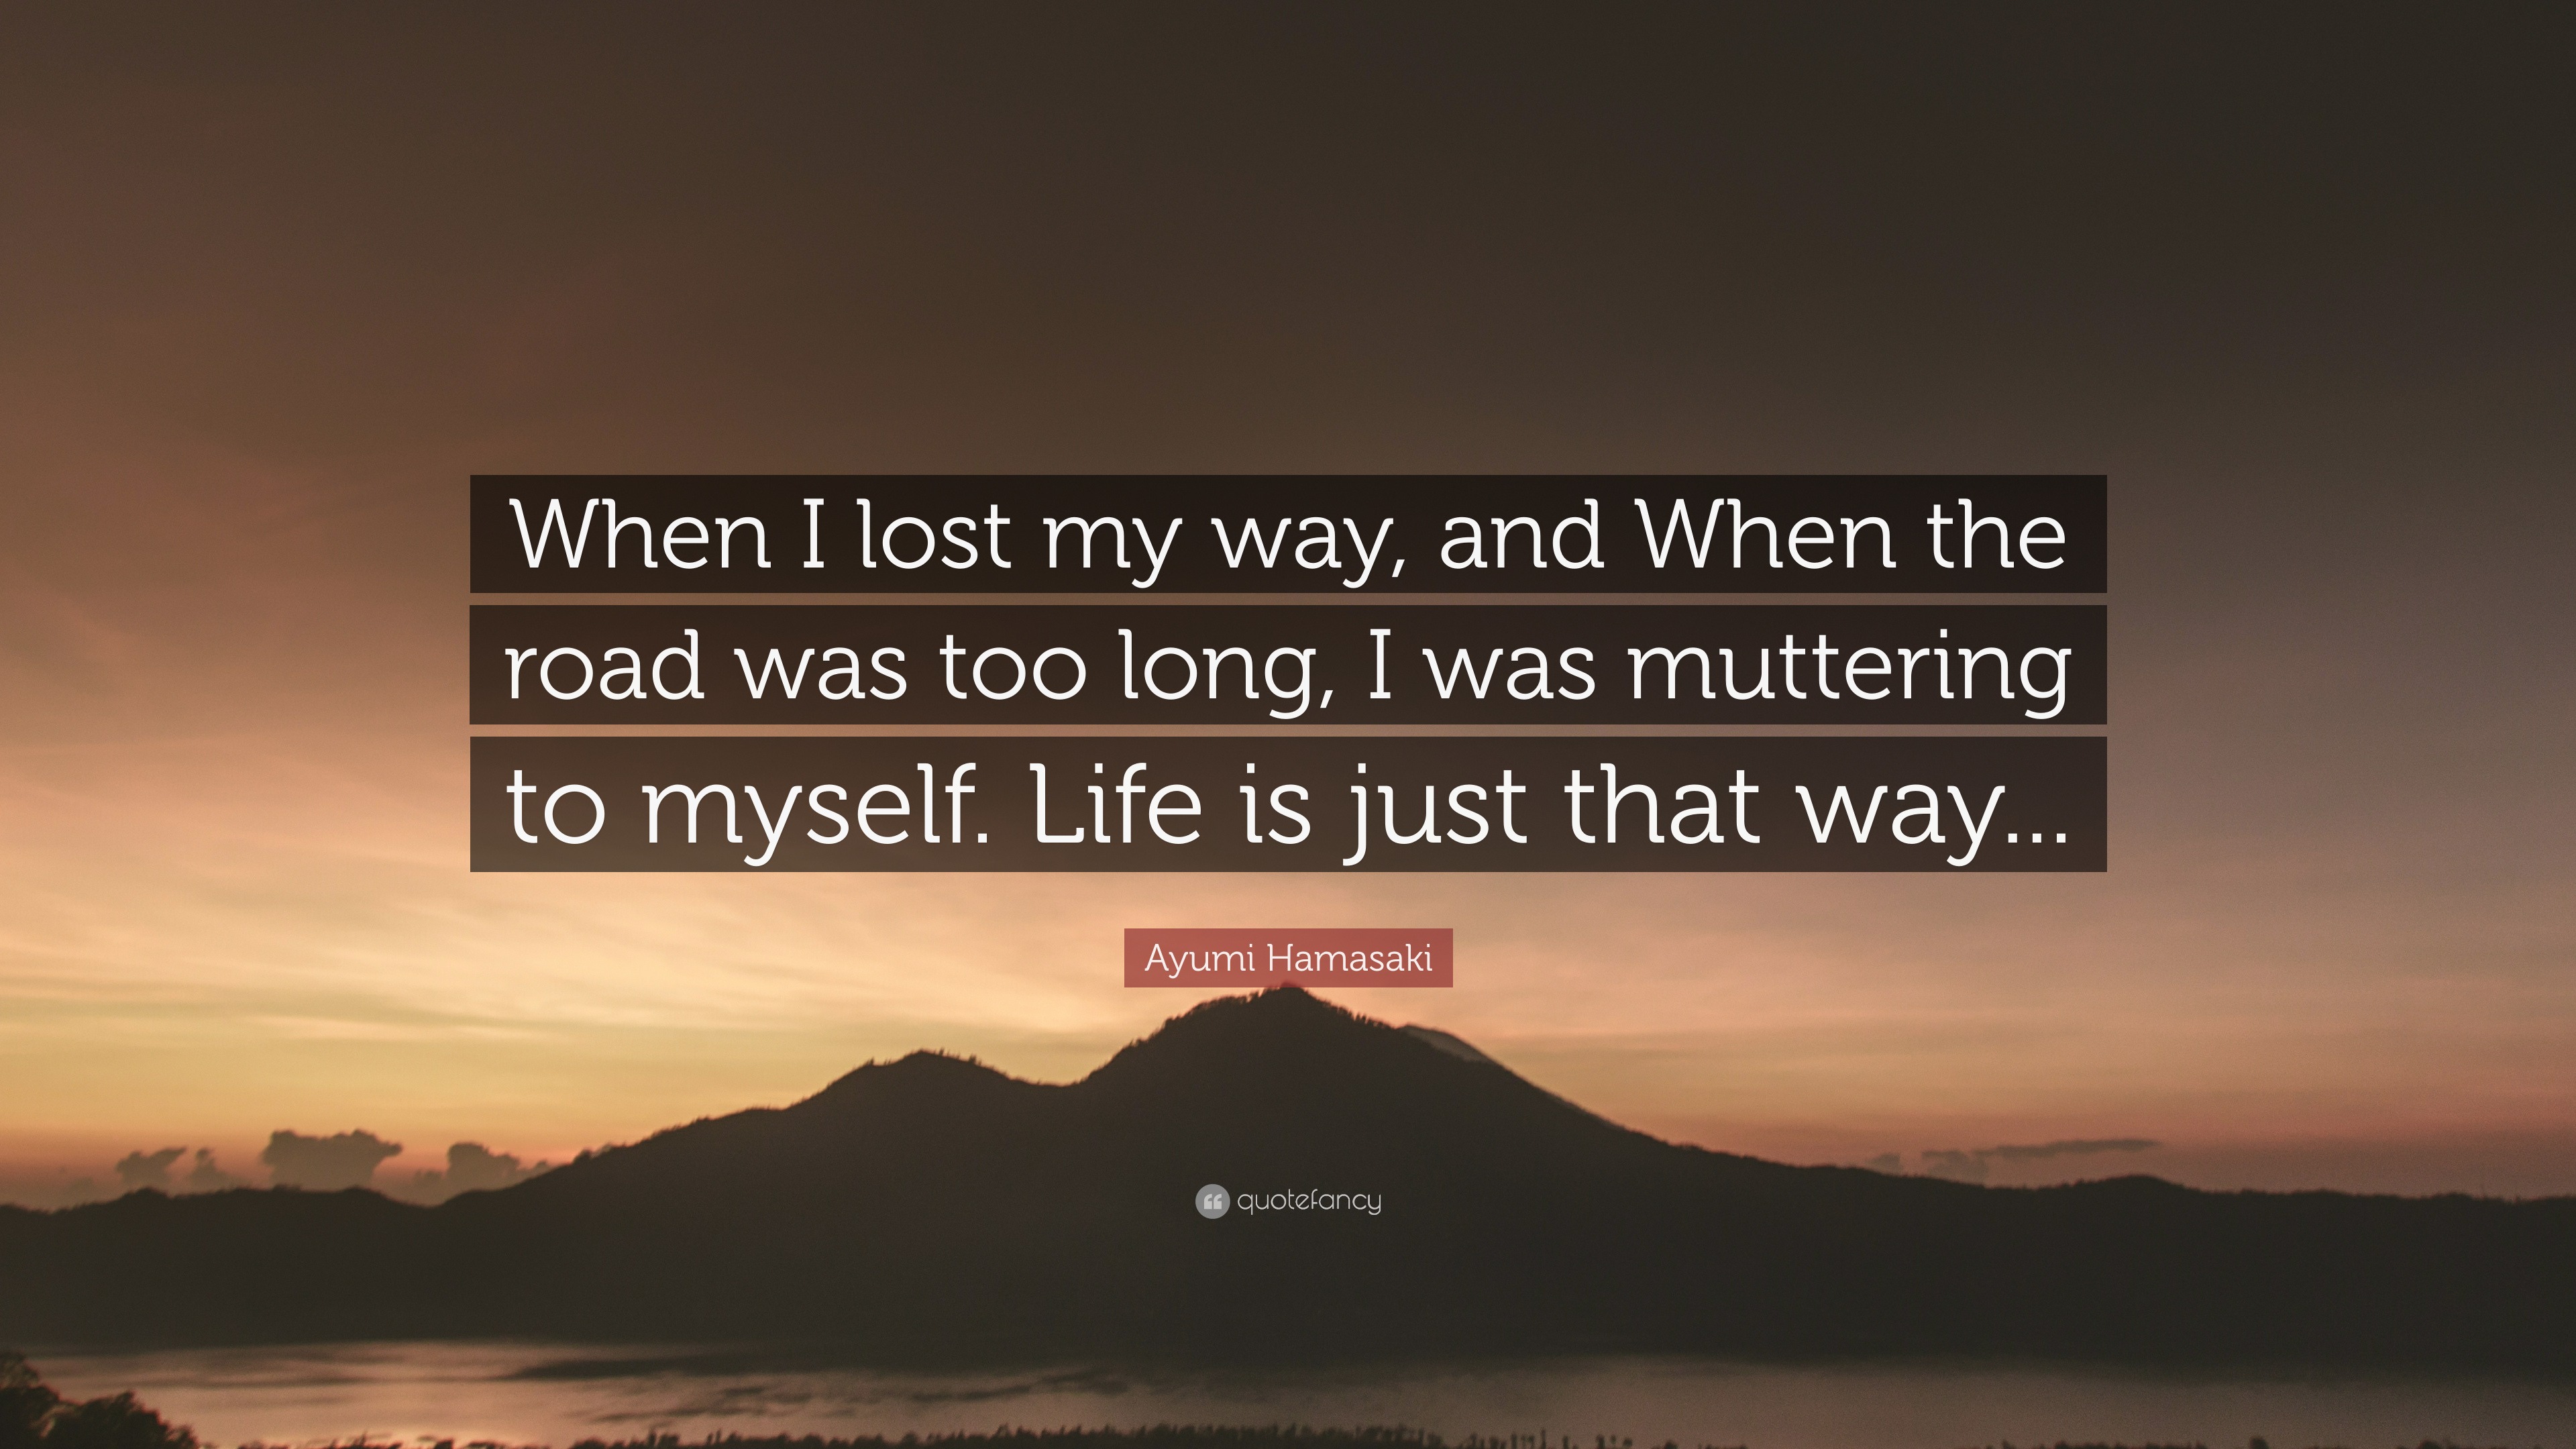 Ayumi Hamasaki Quote: “When I lost my way, and When the road was too ...